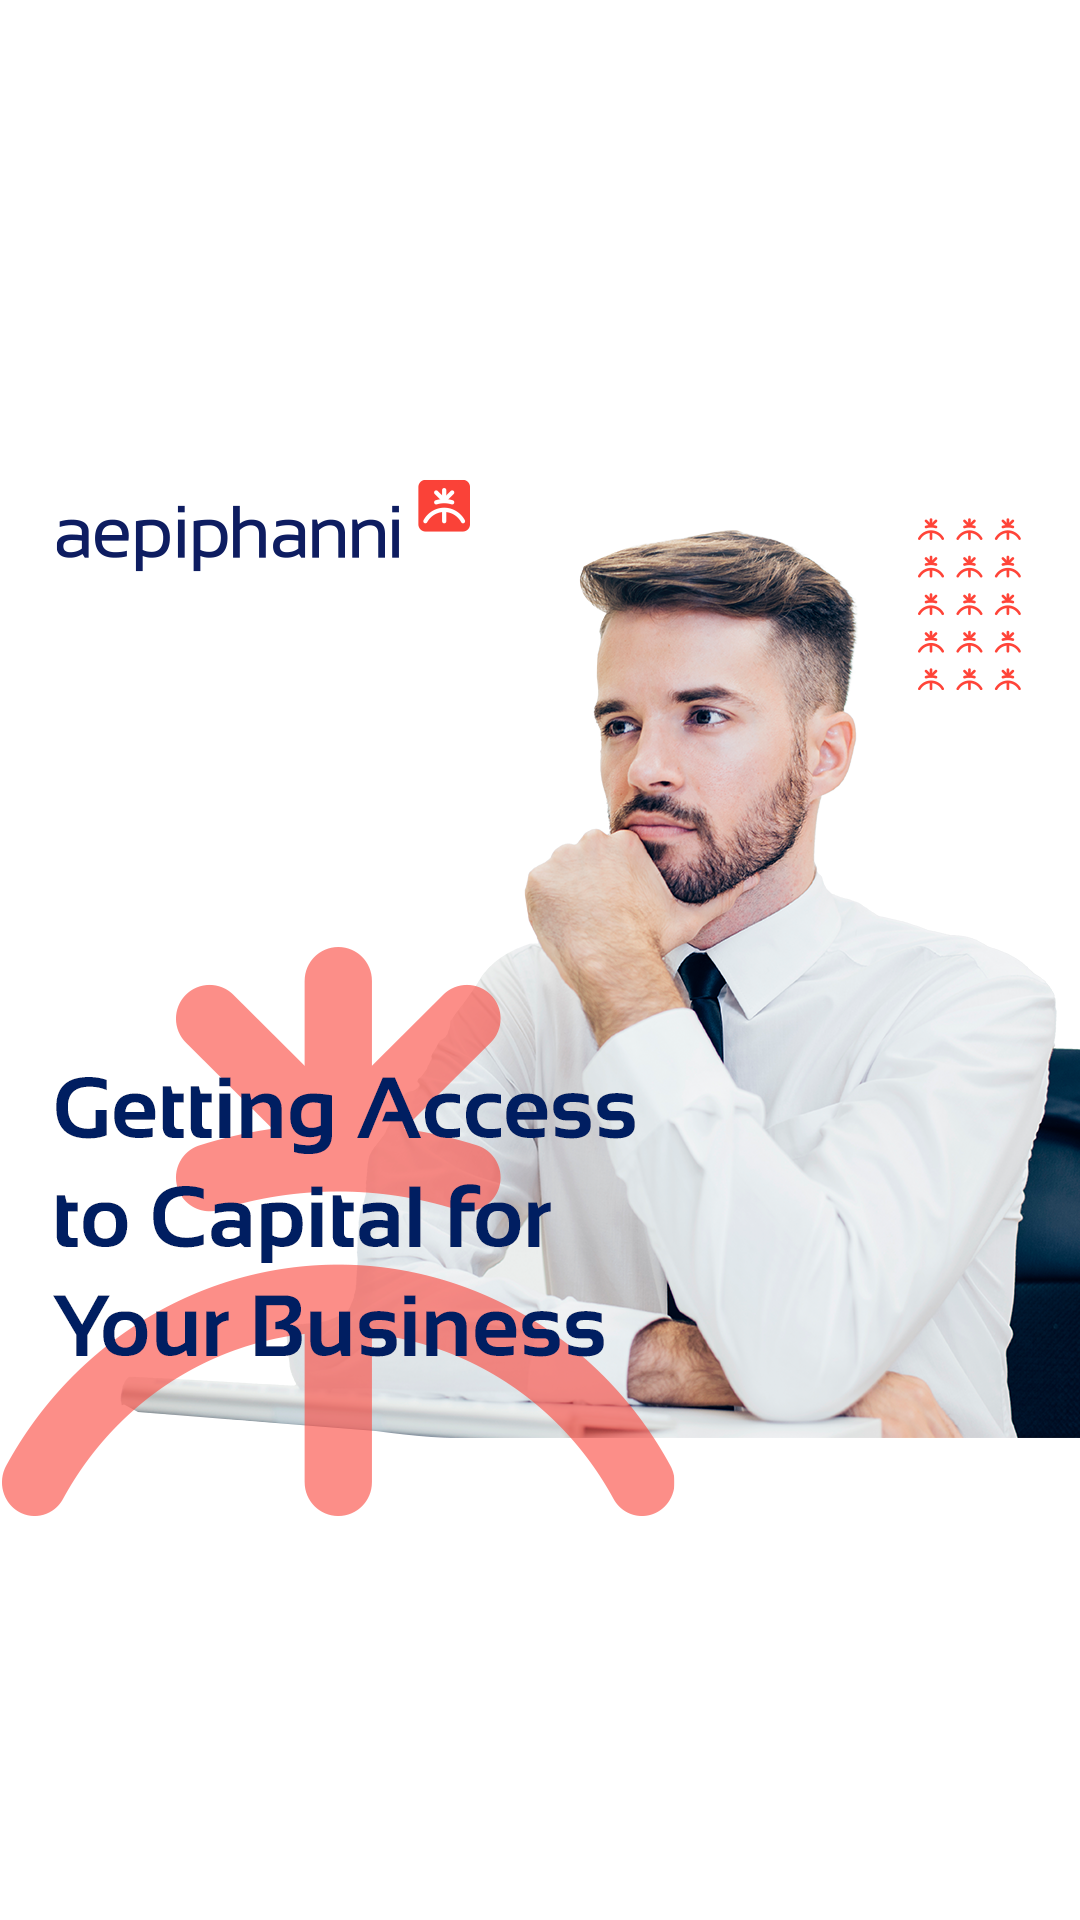 Access to Capital